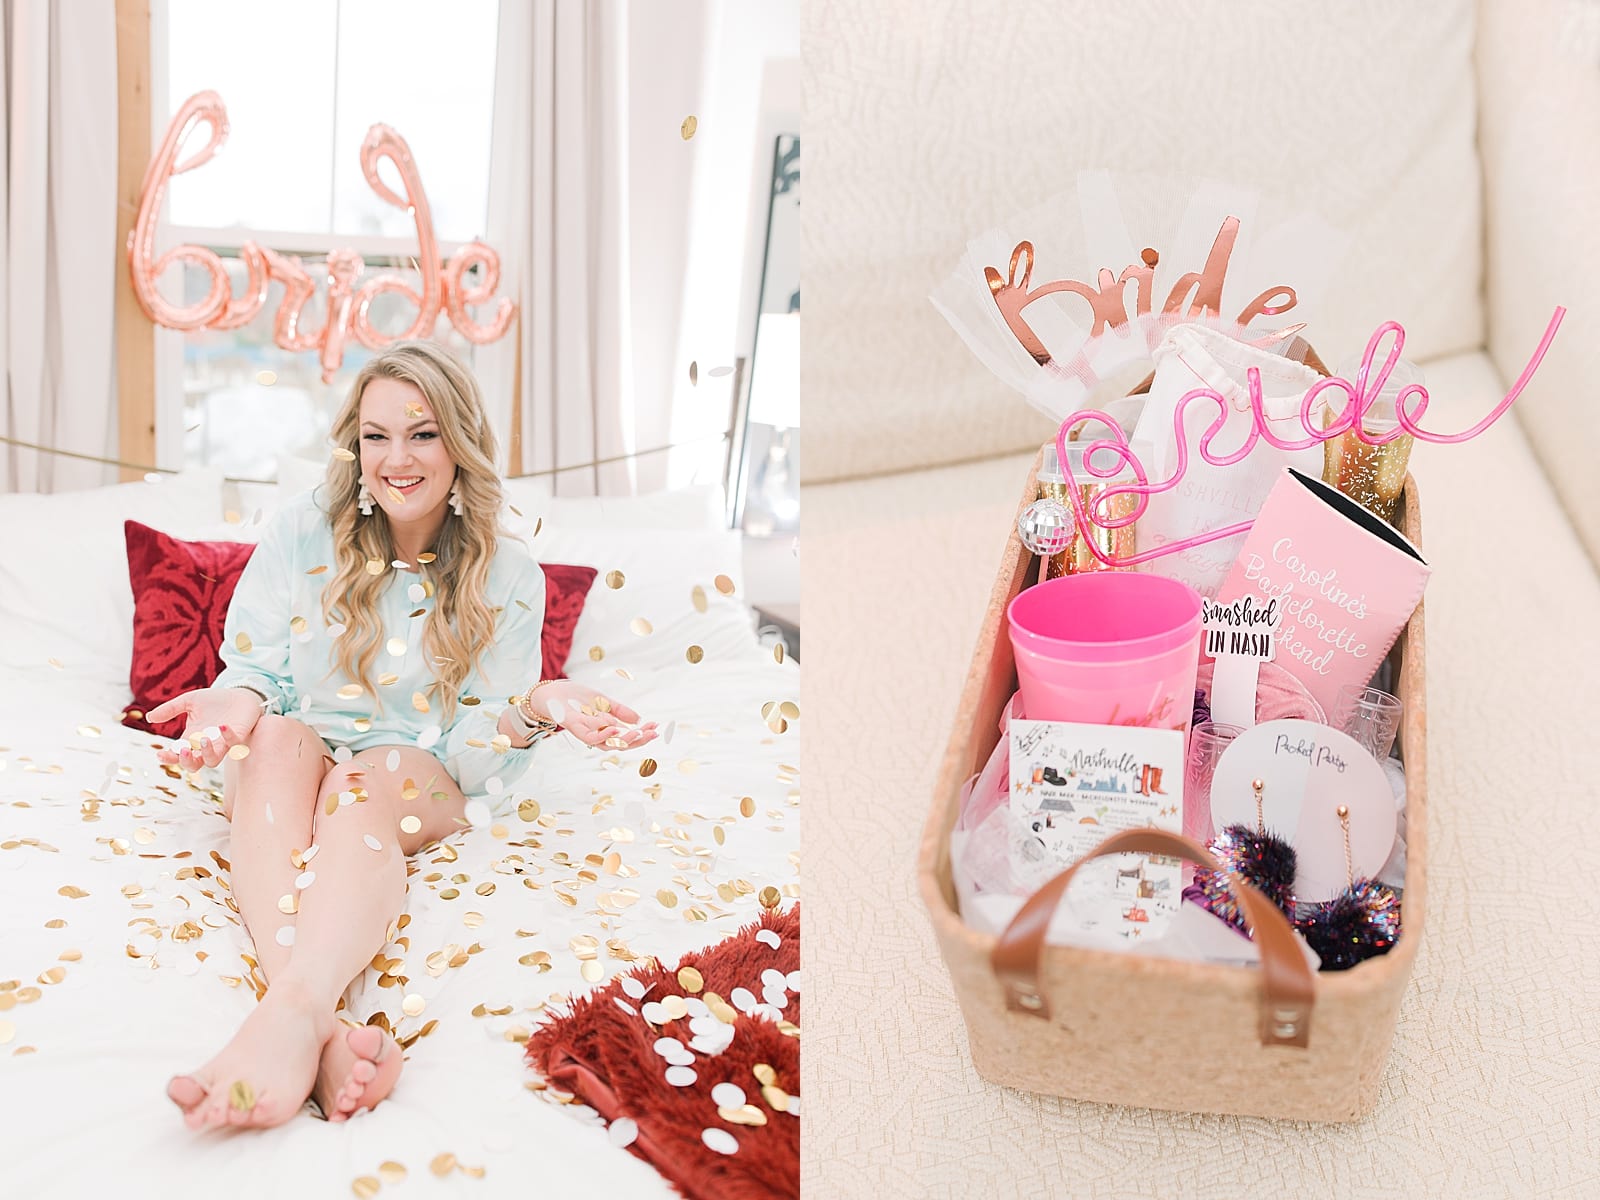 bride on bed with confetti and basket of bridesmaids gifts Photos